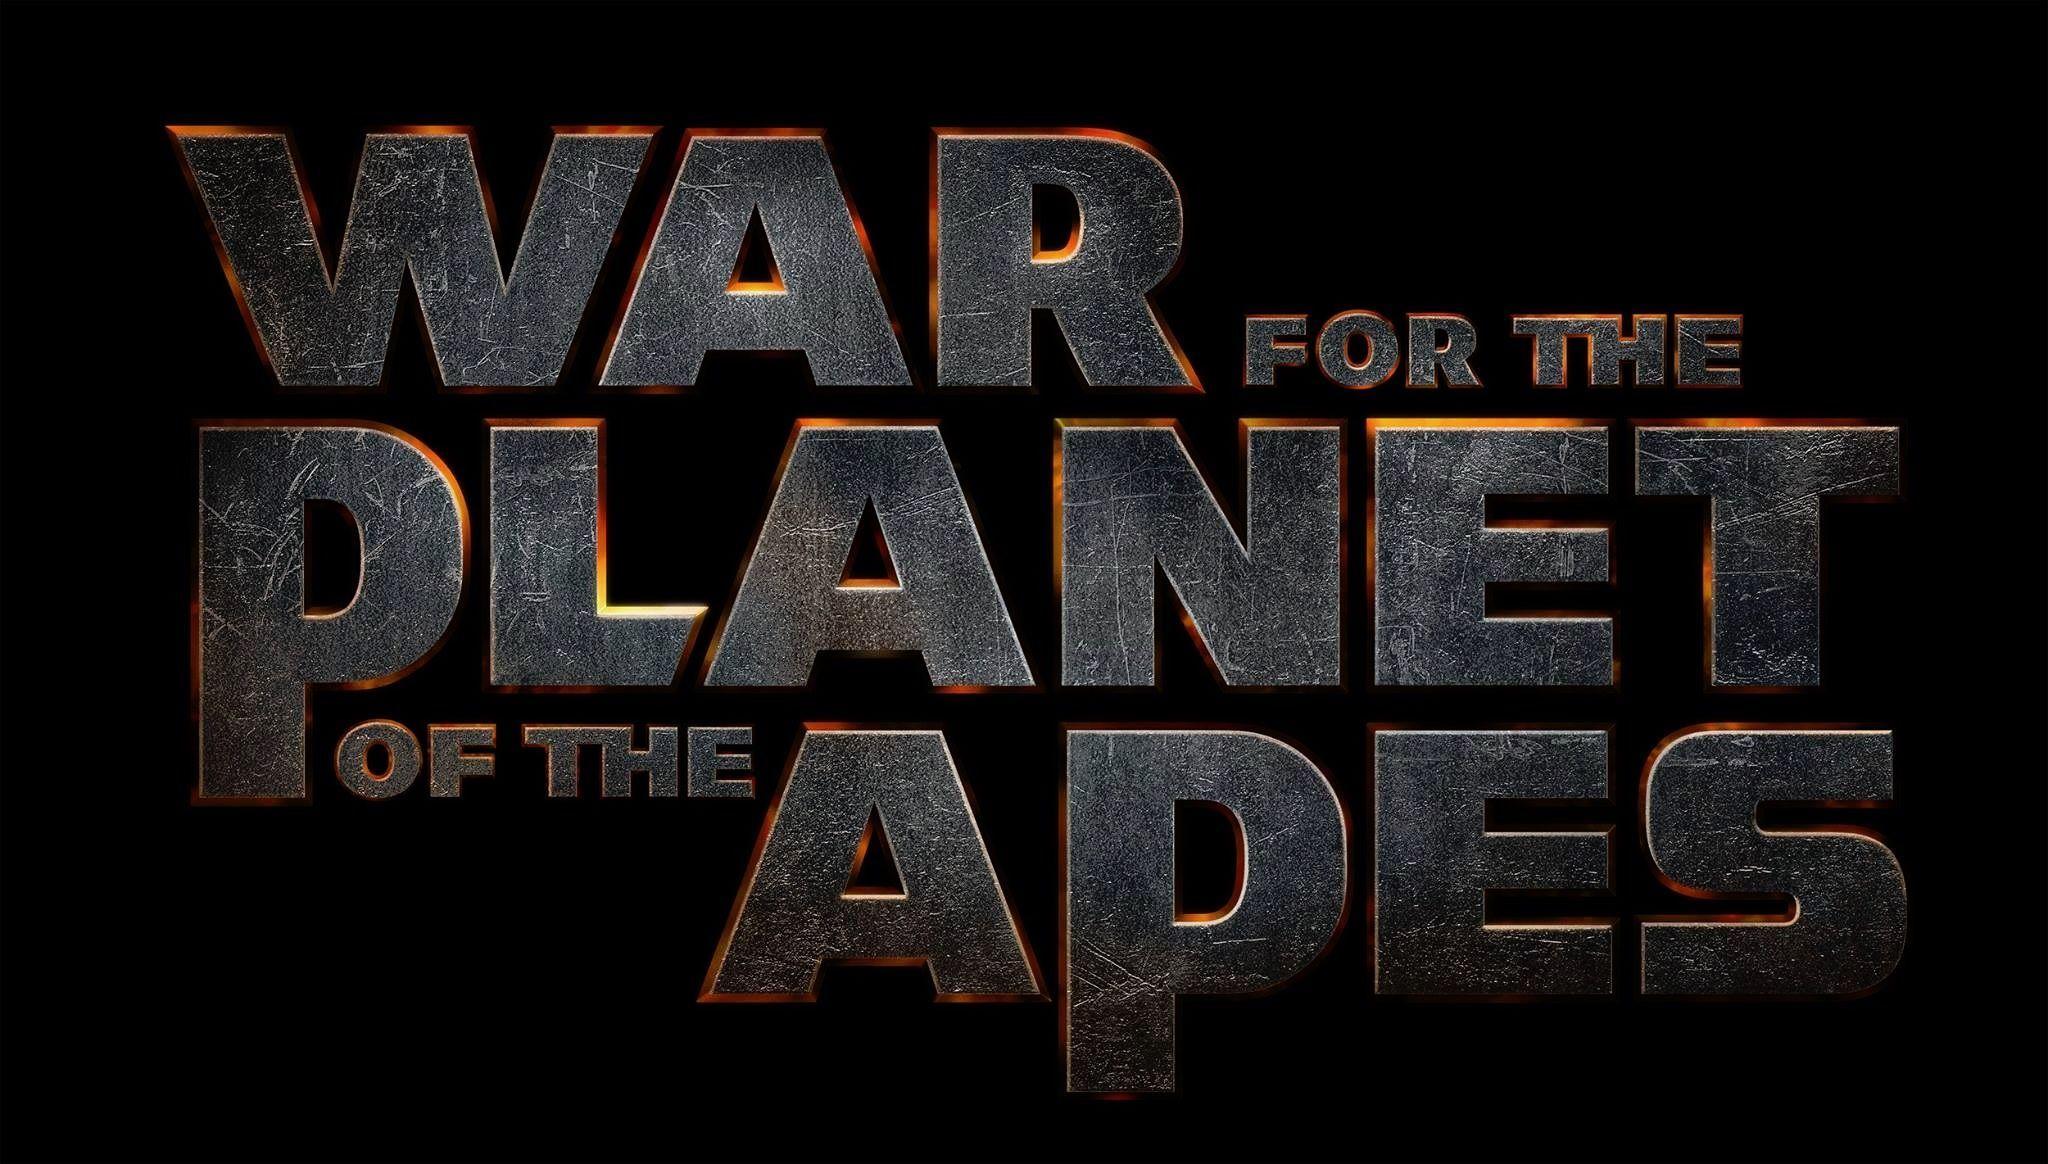 HD War for the Planet of the Apes Movie Wallpaper